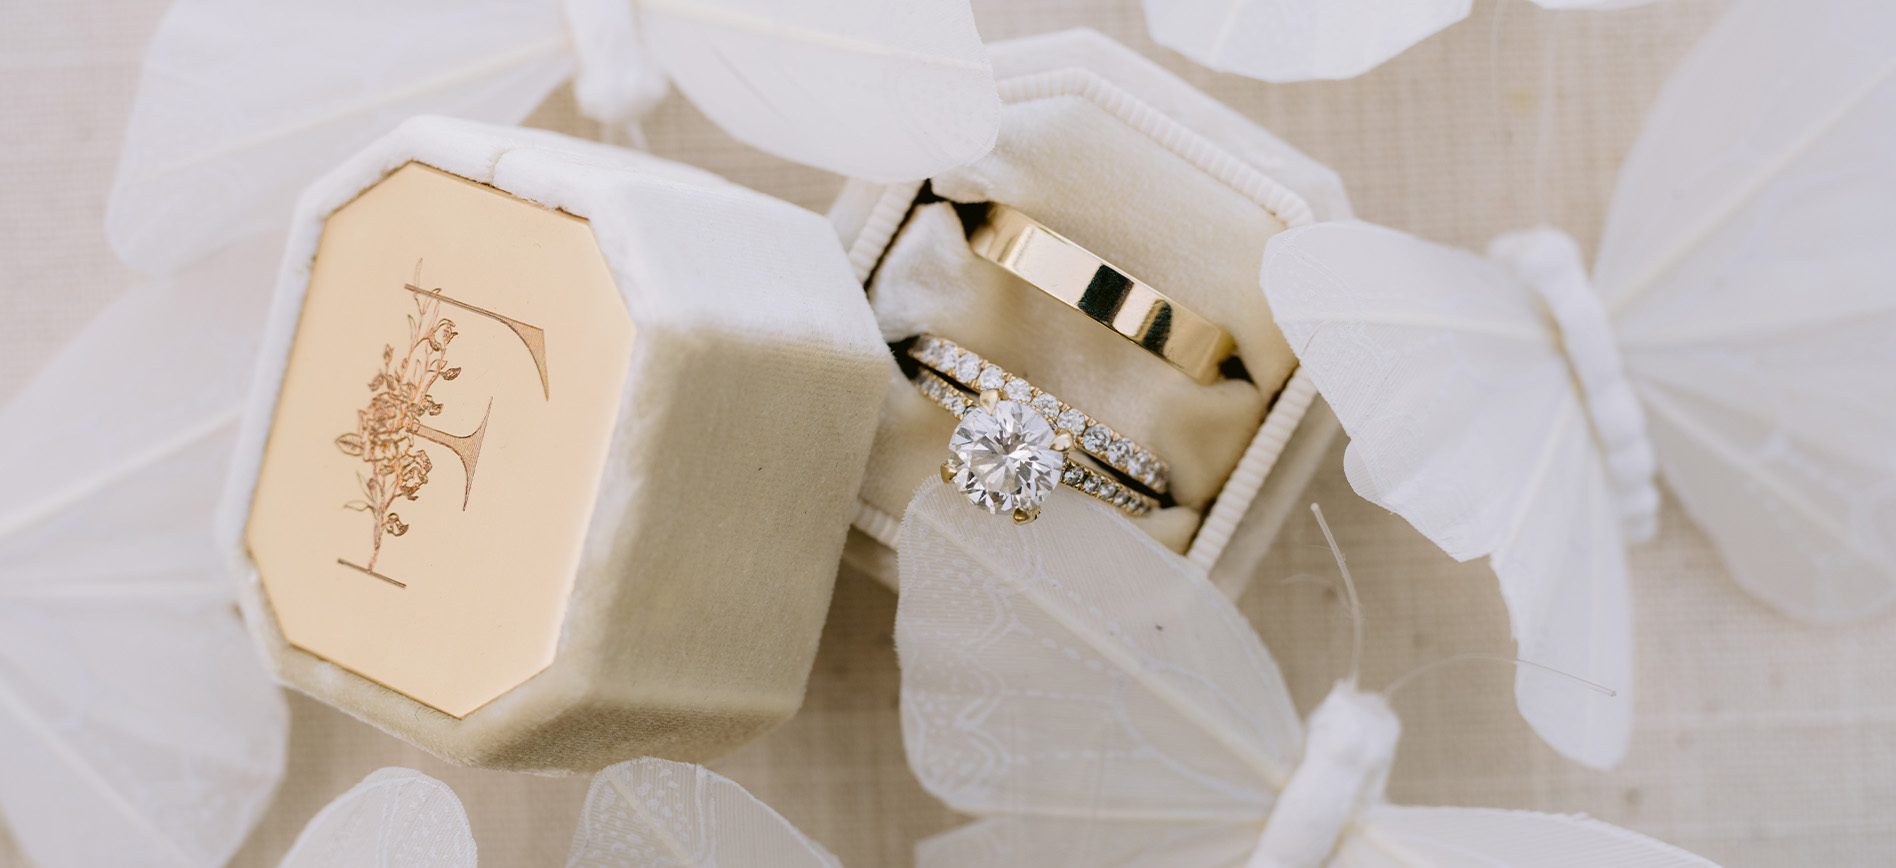 A photograph of wedding rings surrounded by white lace butterflies